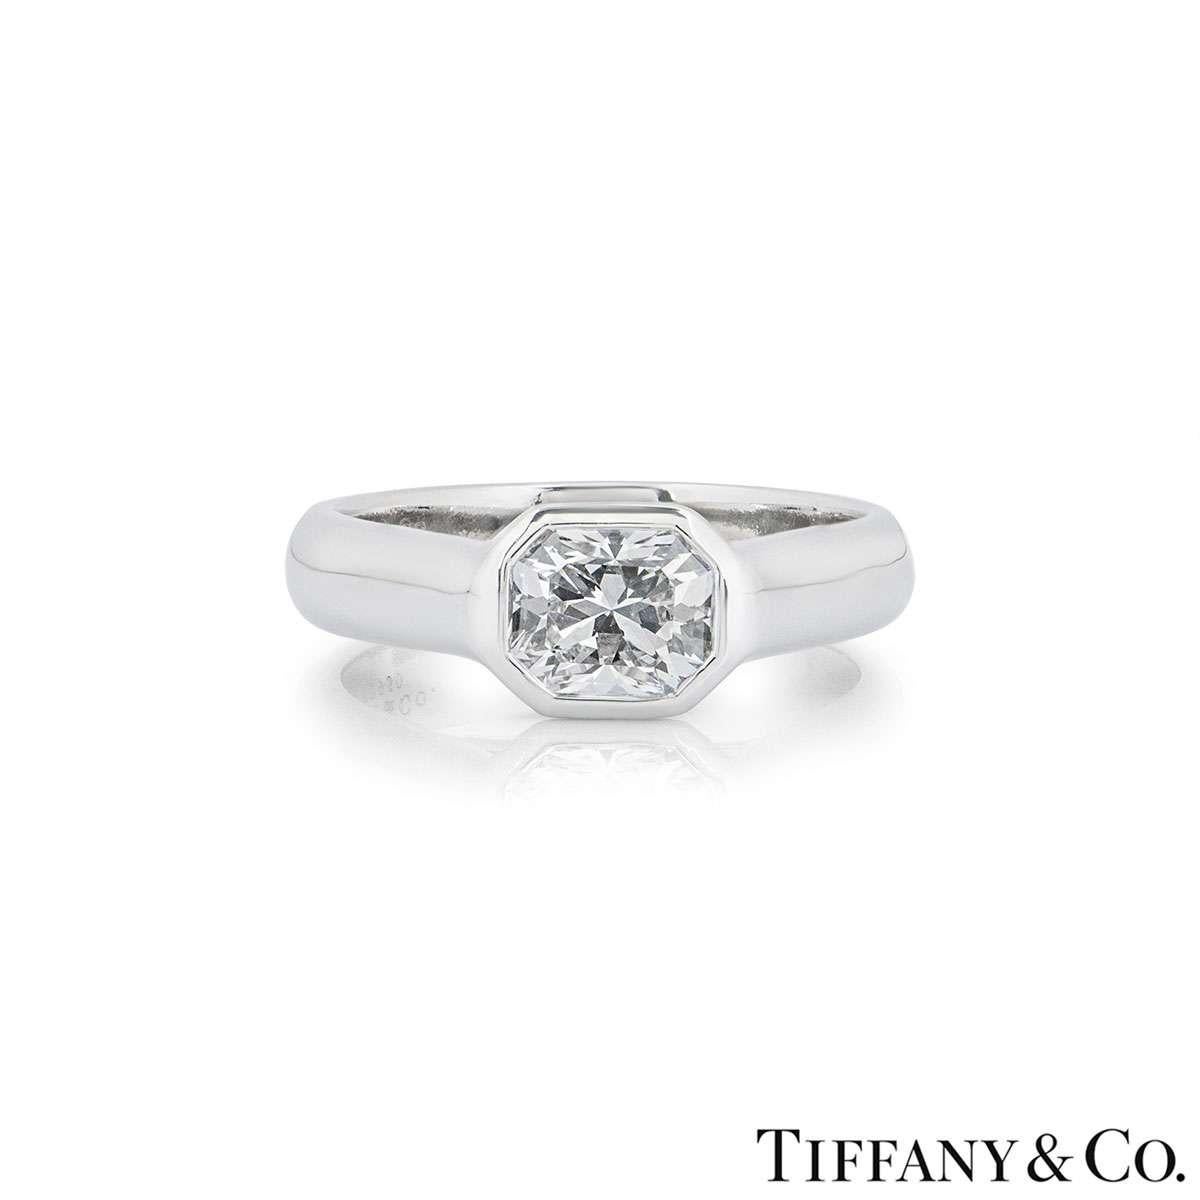 A beautiful platinum diamond ring from the Lucida collection by Tiffany & Co. The ring features a rubover set Lucida cut diamond weighing 1.03ct, F colour and IF (Internally Flawless) clarity. The ring is currently a size UK L / EU 51 / US 6 but can